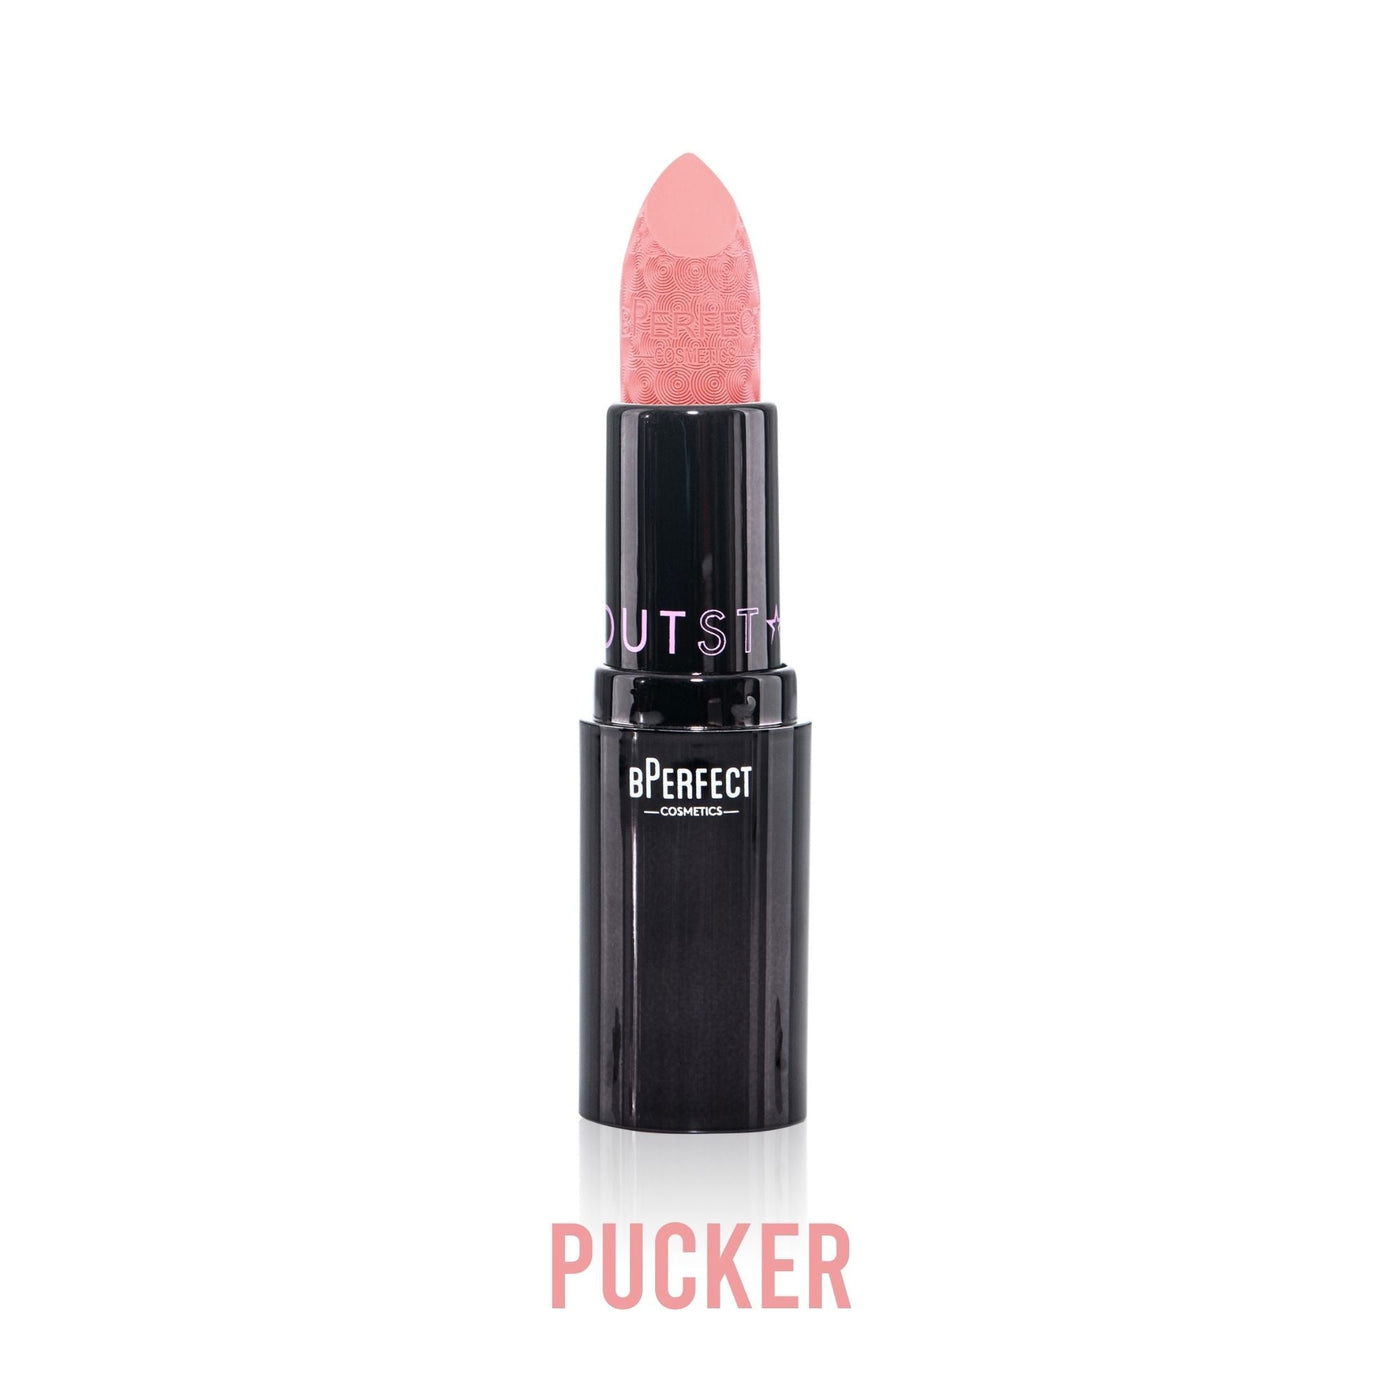 Poutstar Soft Satin Lipstick - The Collection